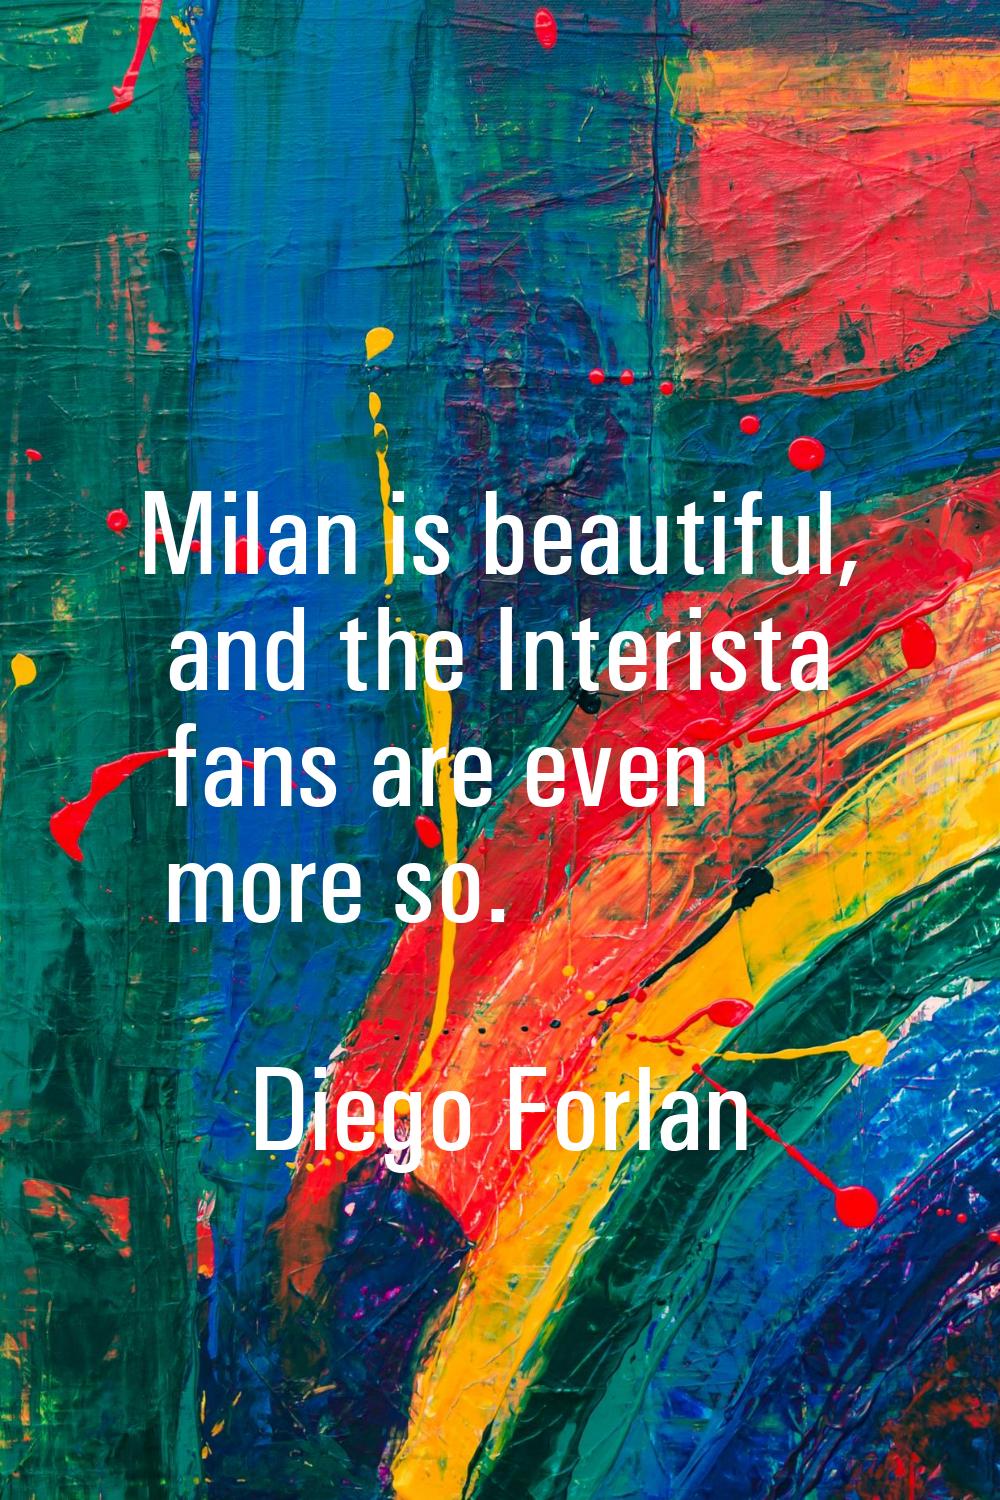 Milan is beautiful, and the Interista fans are even more so.